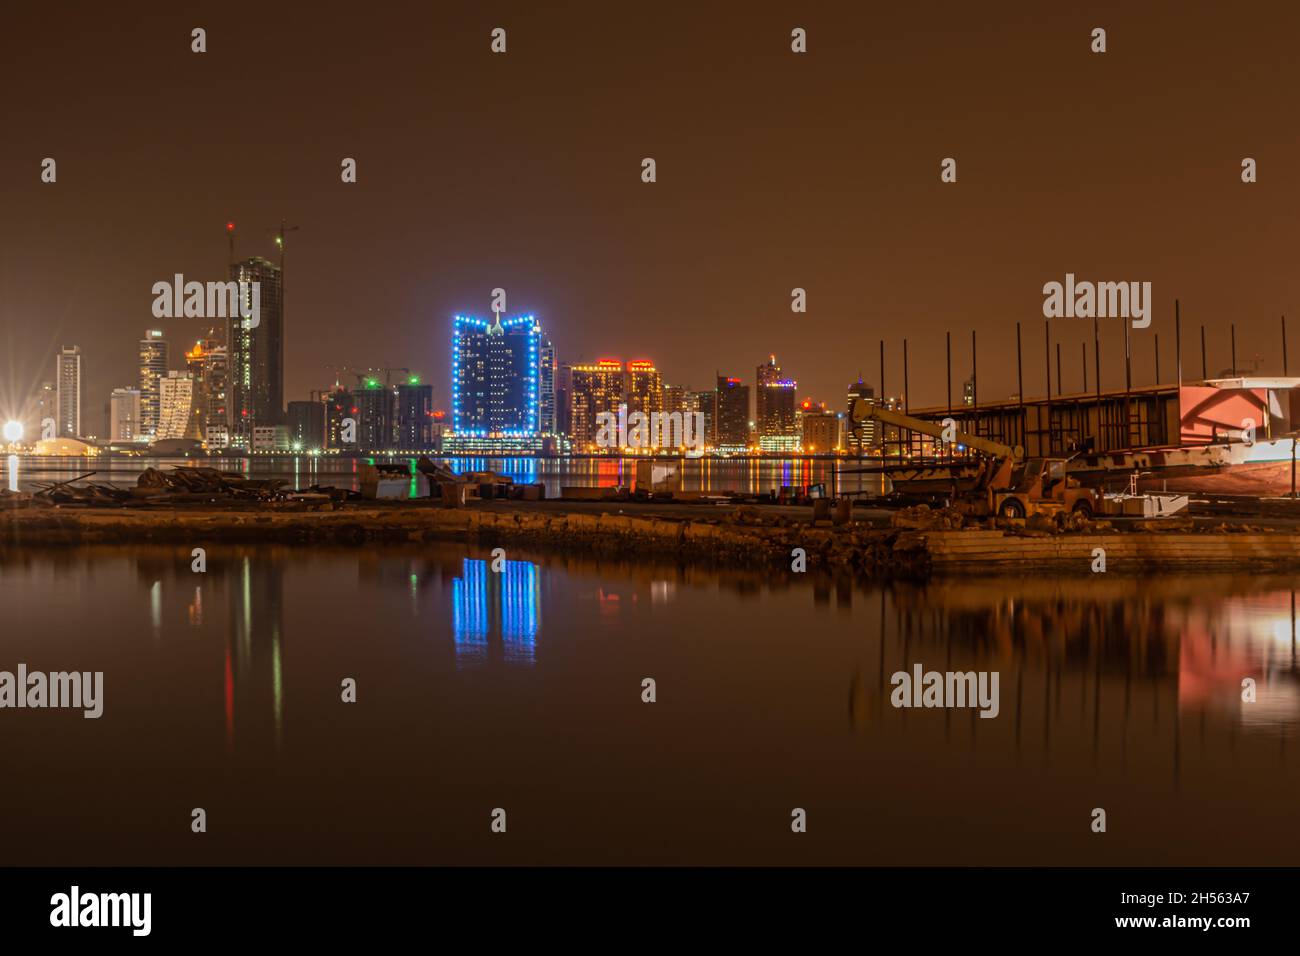 Night modern city skyline with neon lights and reflection in the water. Manama, the Capital of Bahrain, Middle East Stock Photo